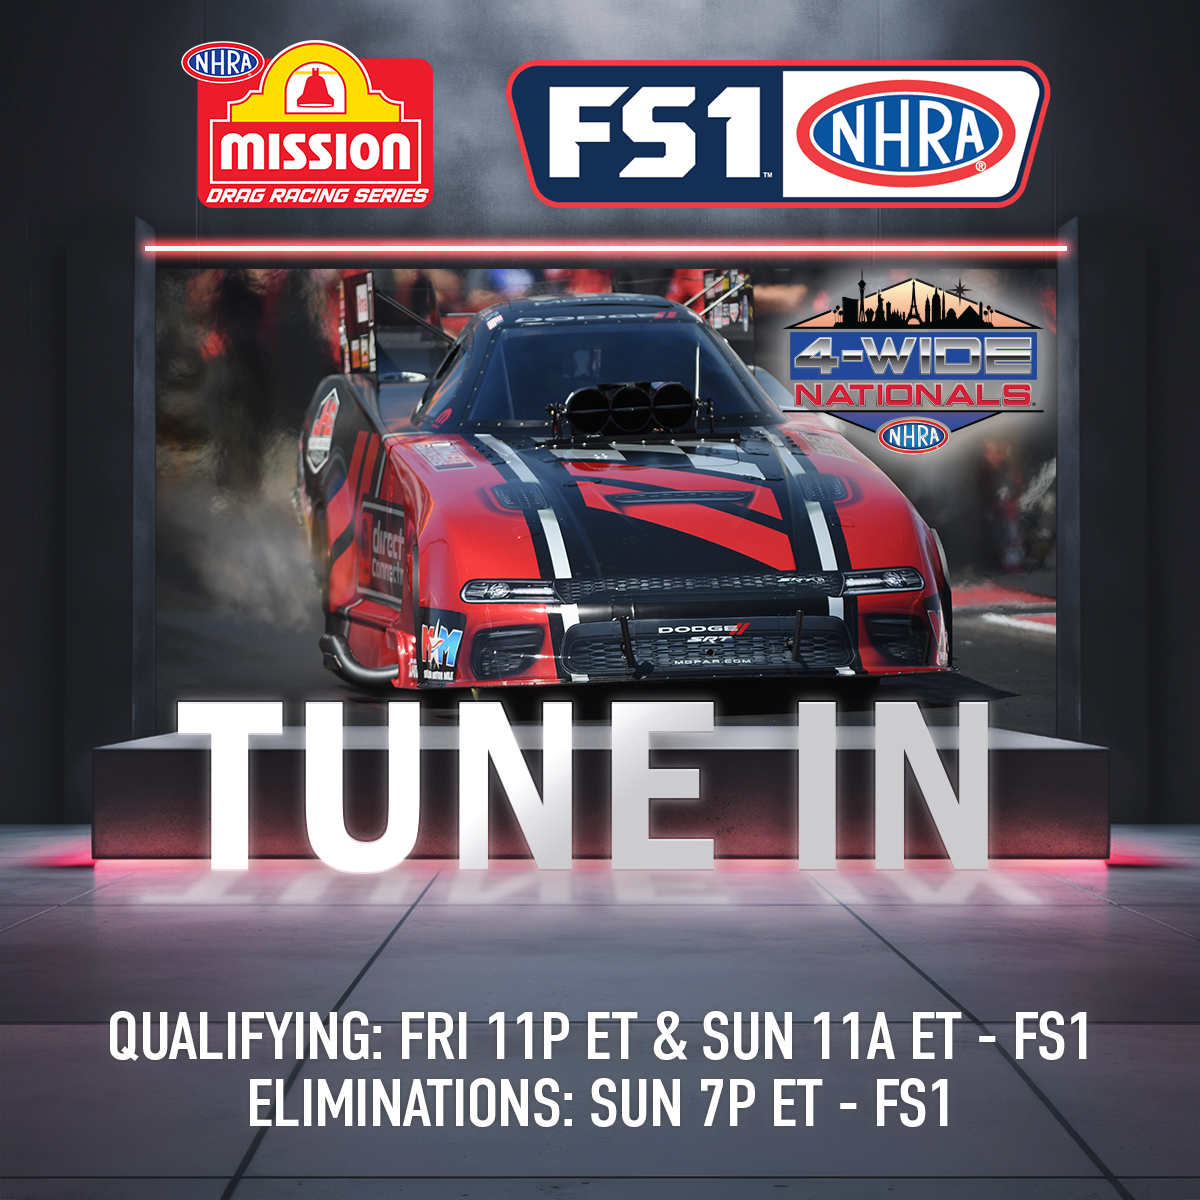 #NHRA Four-Wide Nationals this weekend at @LVMotorSpeedway Get tickets to @MissionFoodsUS 35th Annual @NHRA #northwestnats event happening at #theplacetorace July 19 – 21 NOW → pacificraceways.com/nhra #Vegas4WideNats #SpeedForAll #NHRAonFOX